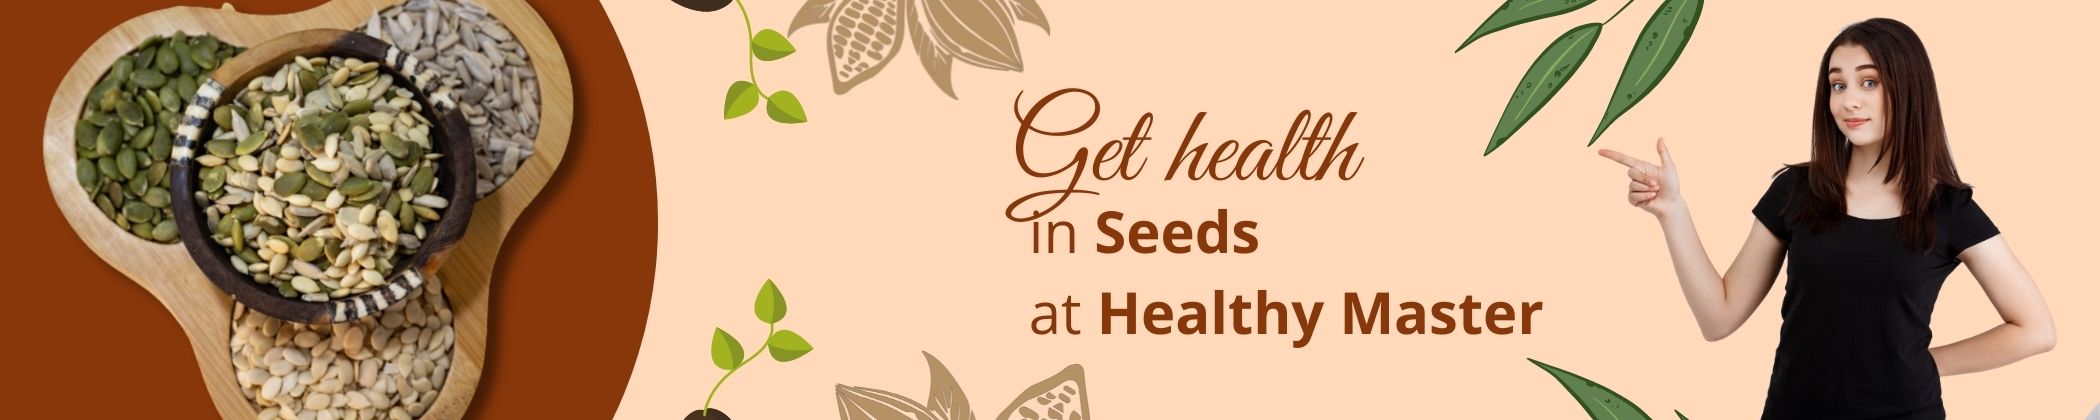 Buy Healthy Seeds At Affordable Price In India | Order Nutritious Seeds Online 